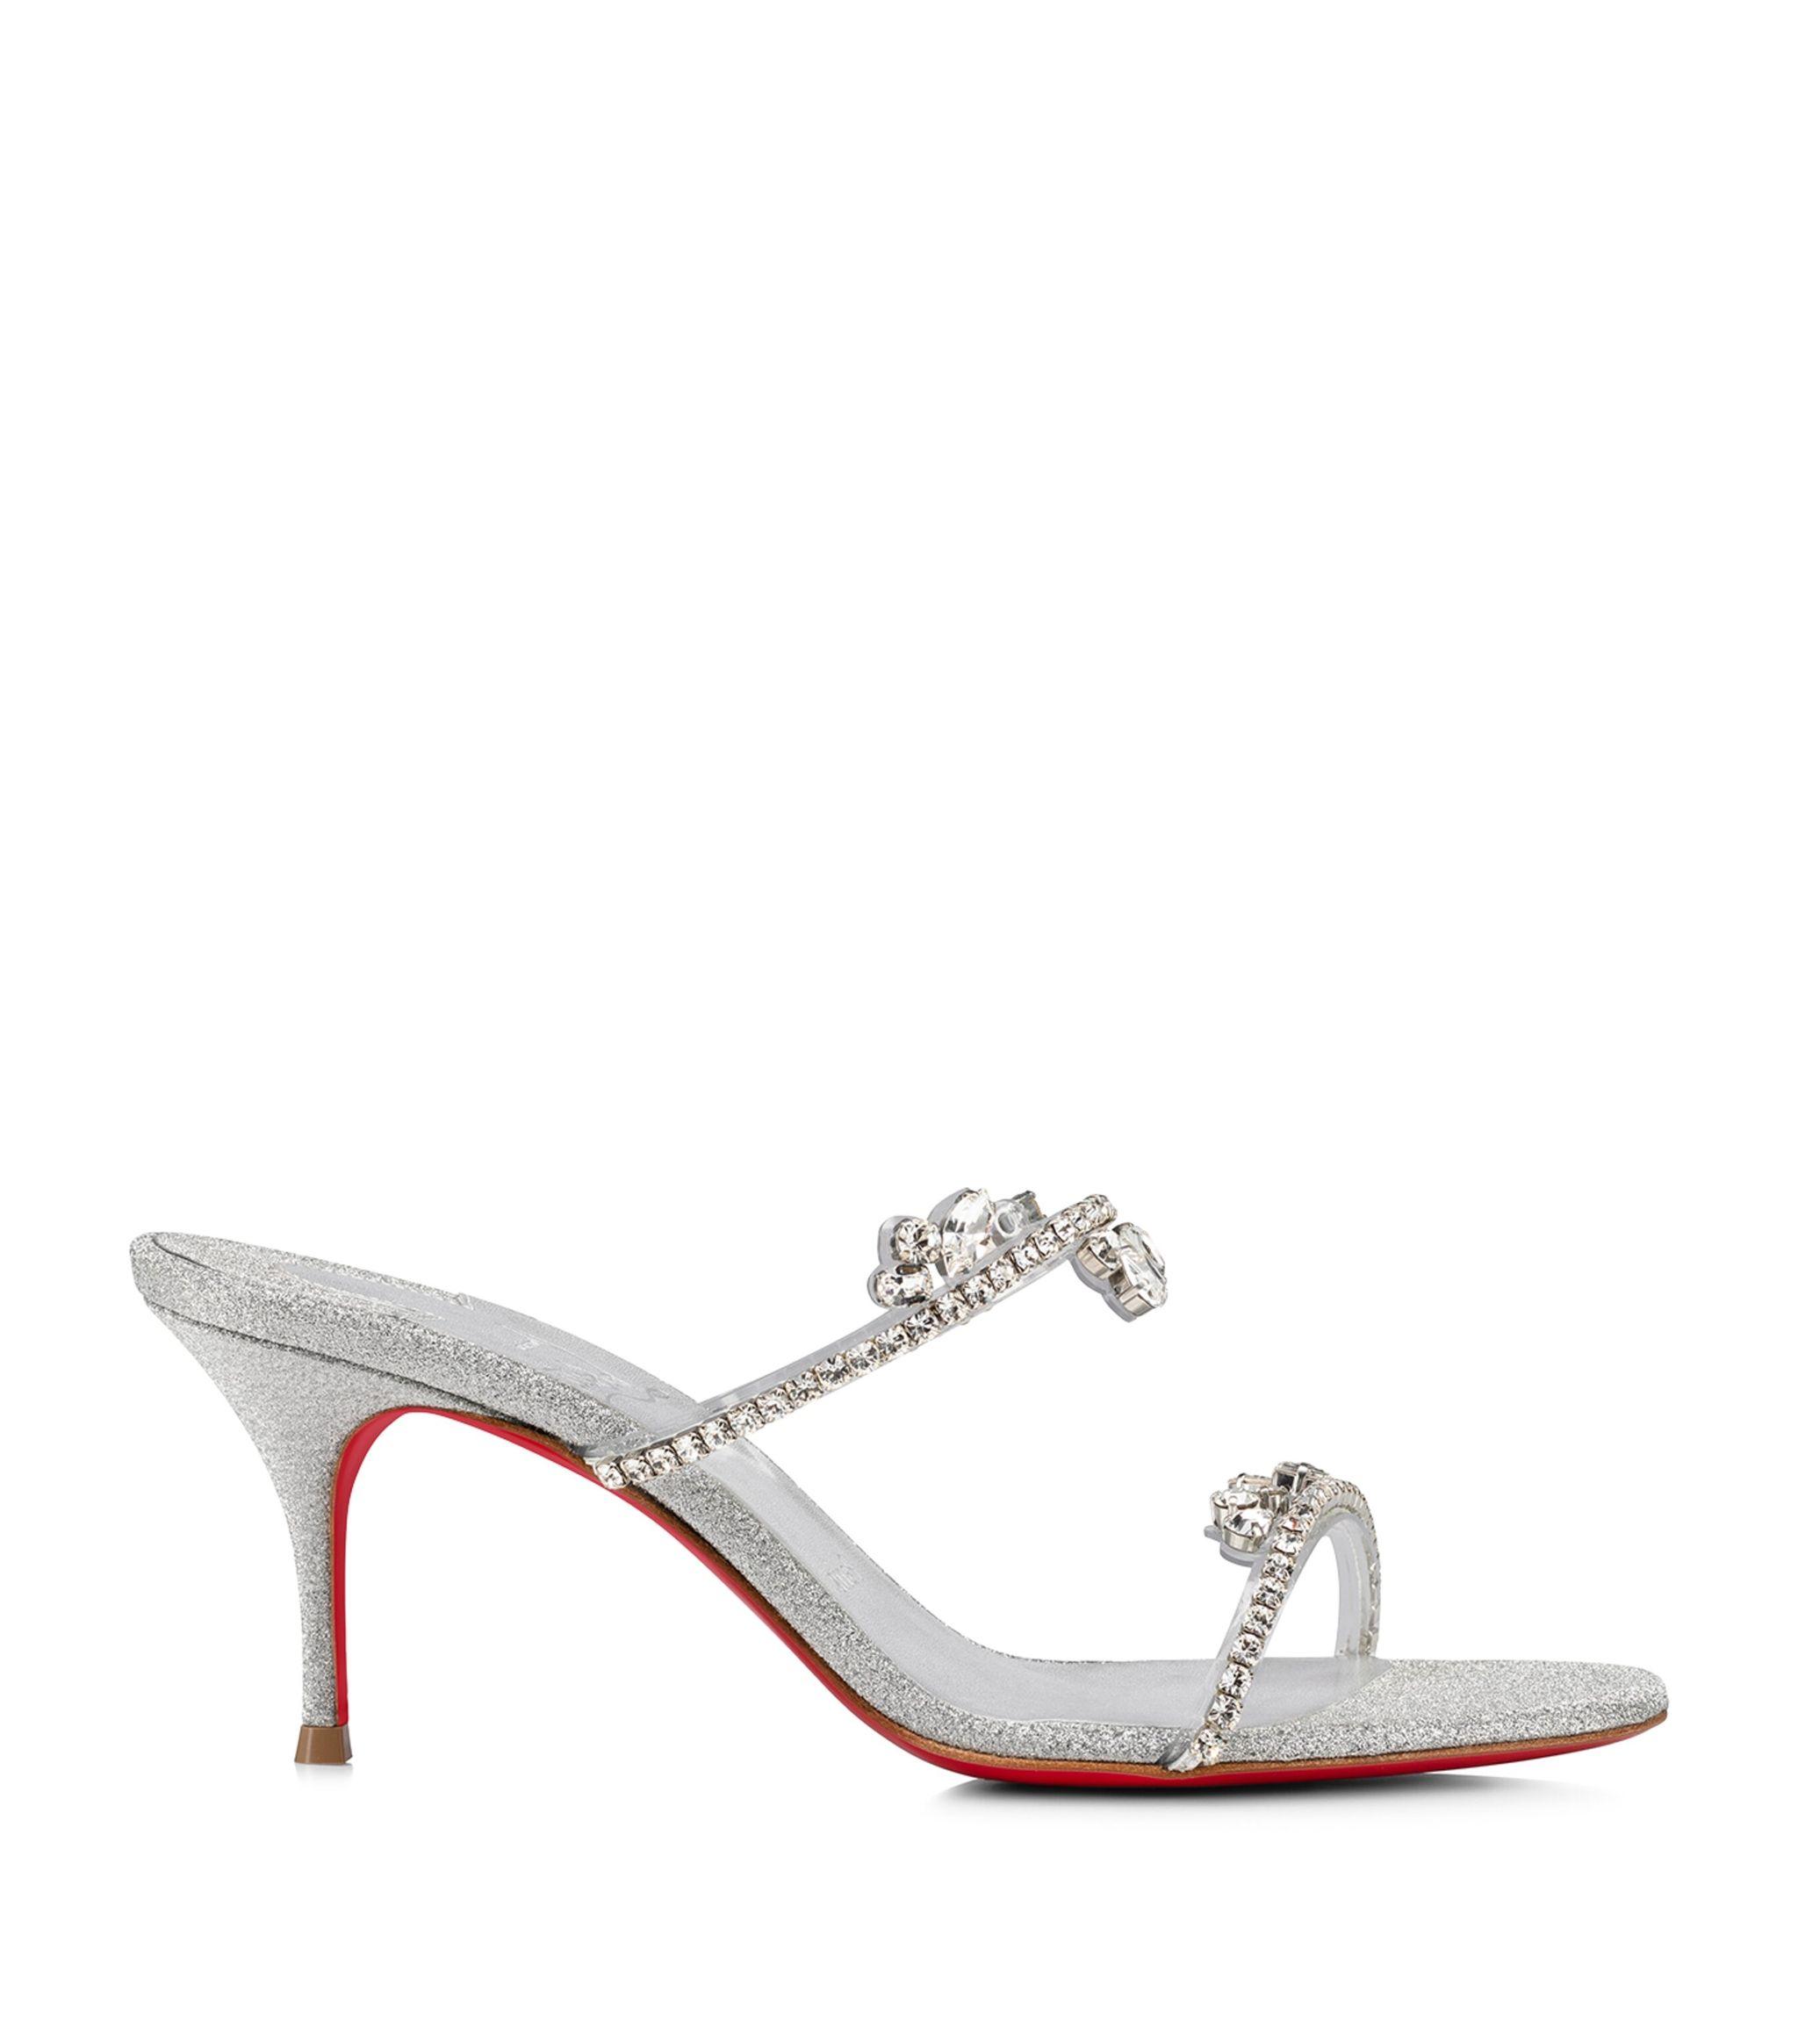 Christian Louboutin Just Queen Calf-leather Mules 70 in White | Lyst